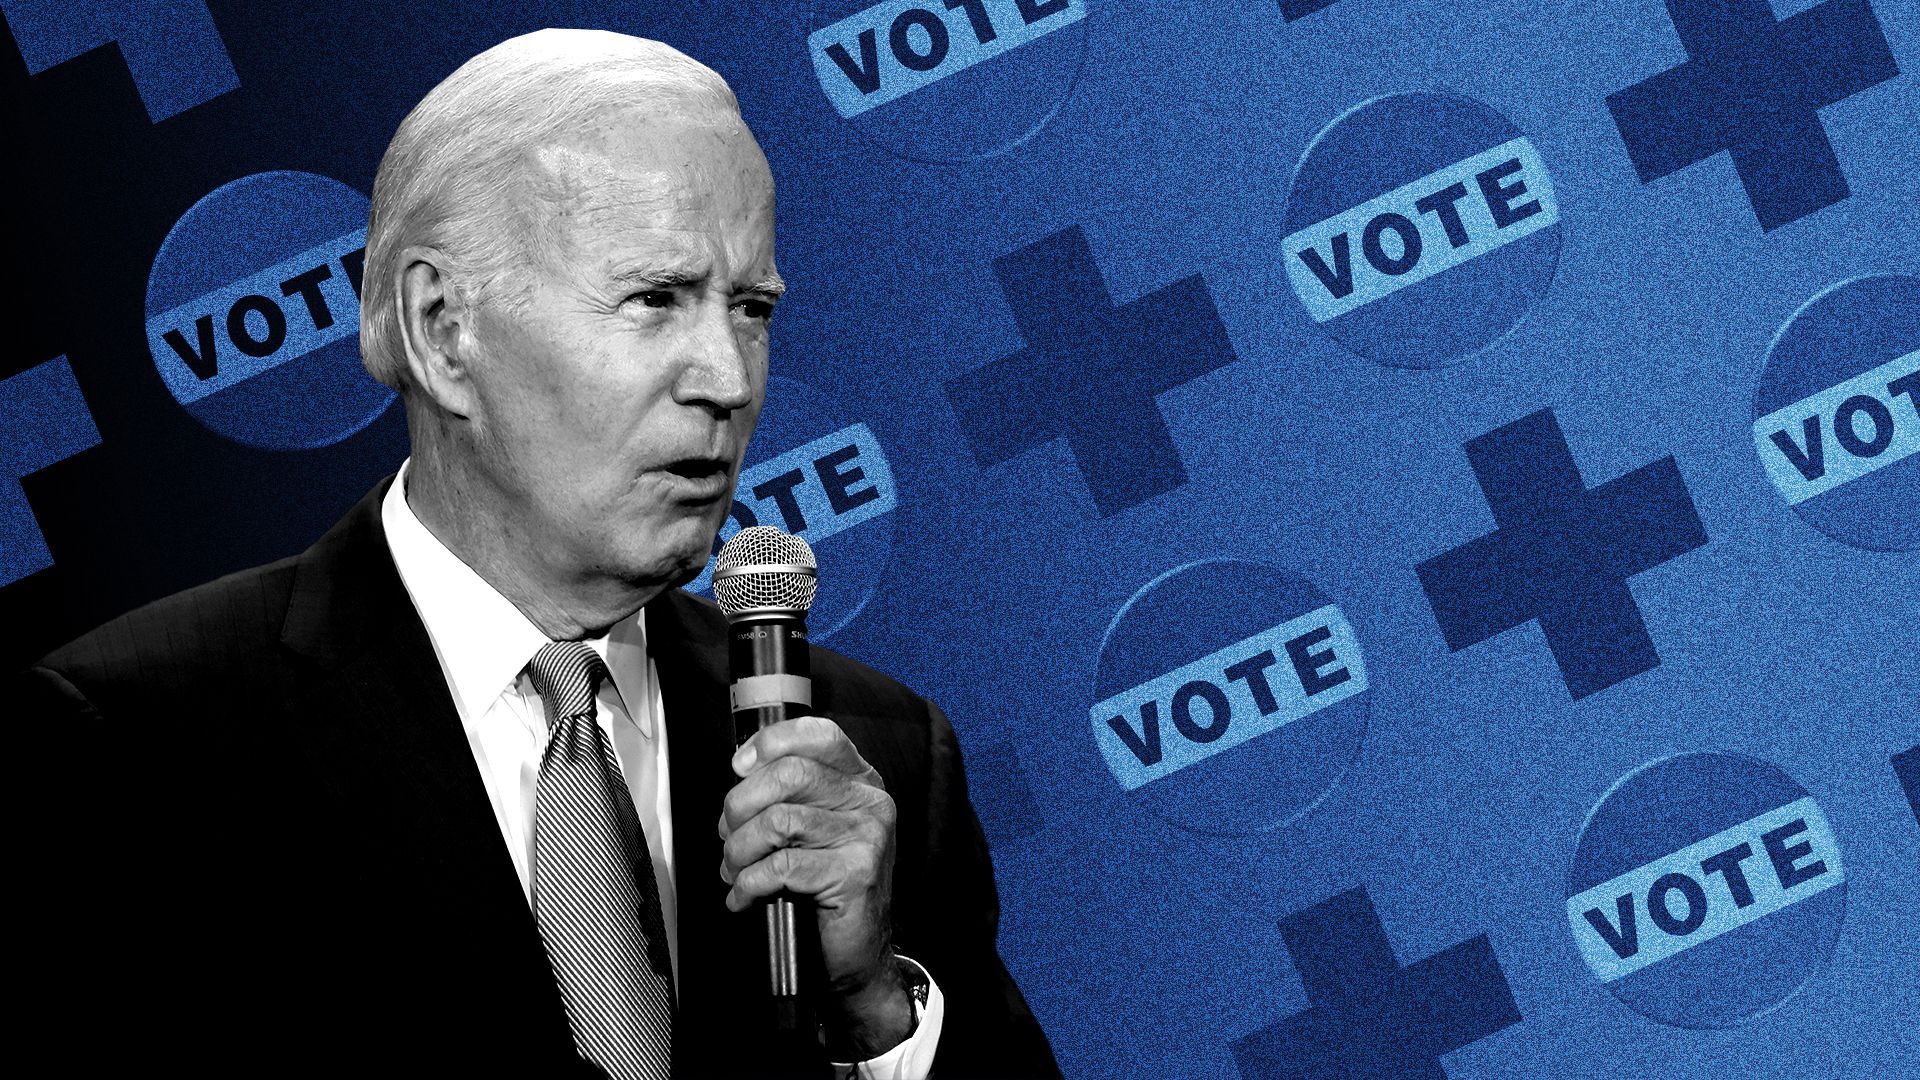 Photo illustration of Biden speaking on a microphone in front of a repeating pattern of VOTE pins and medical crosses